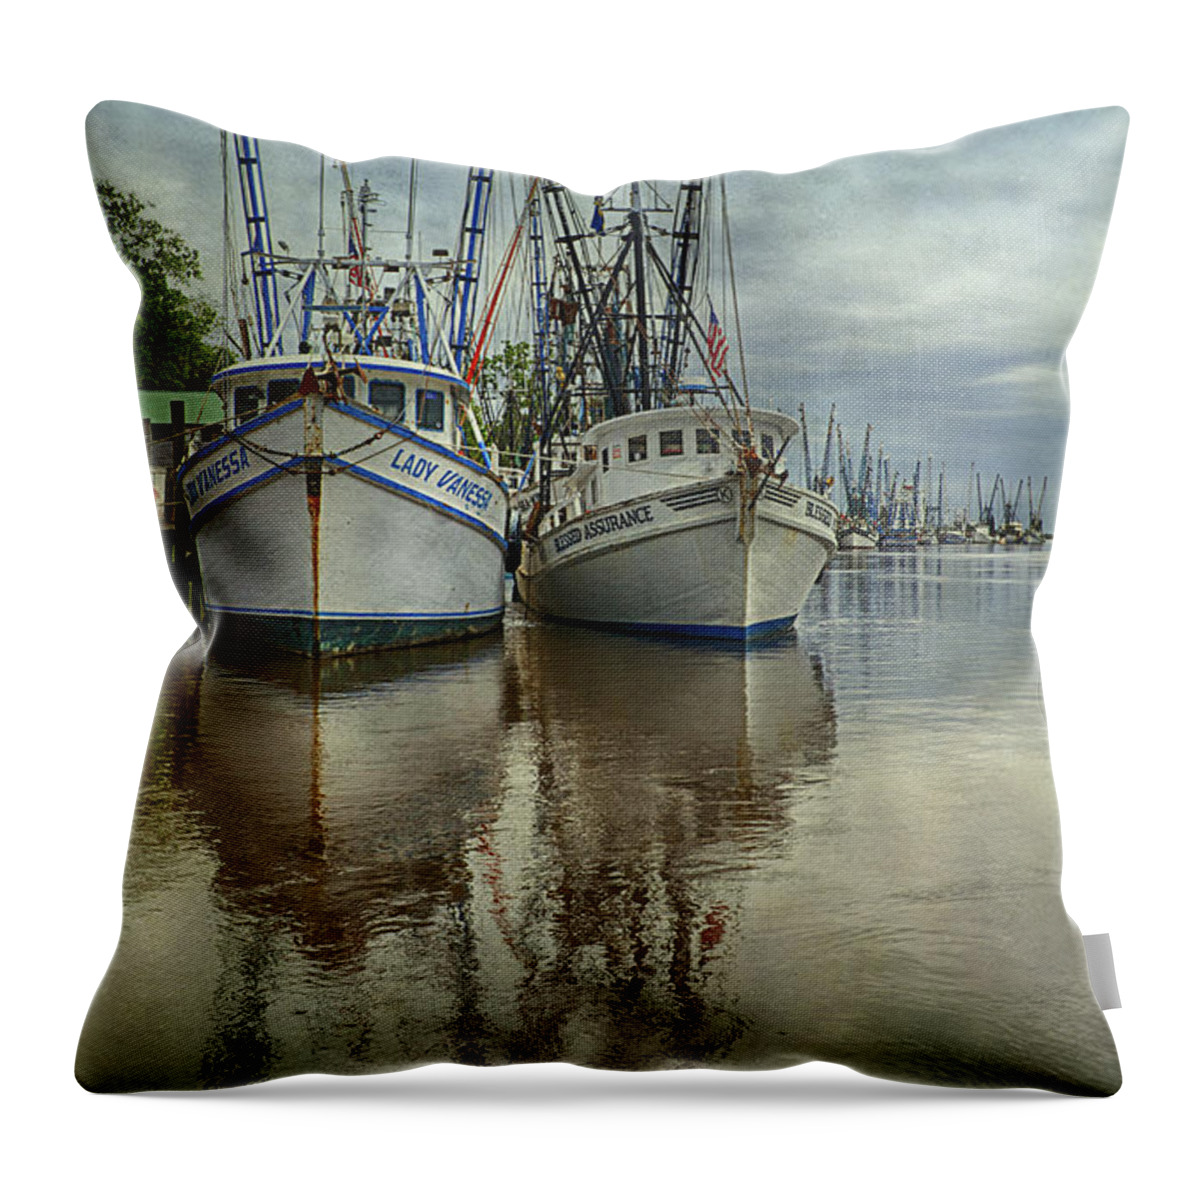 Docked Throw Pillow featuring the photograph Docked by Priscilla Burgers